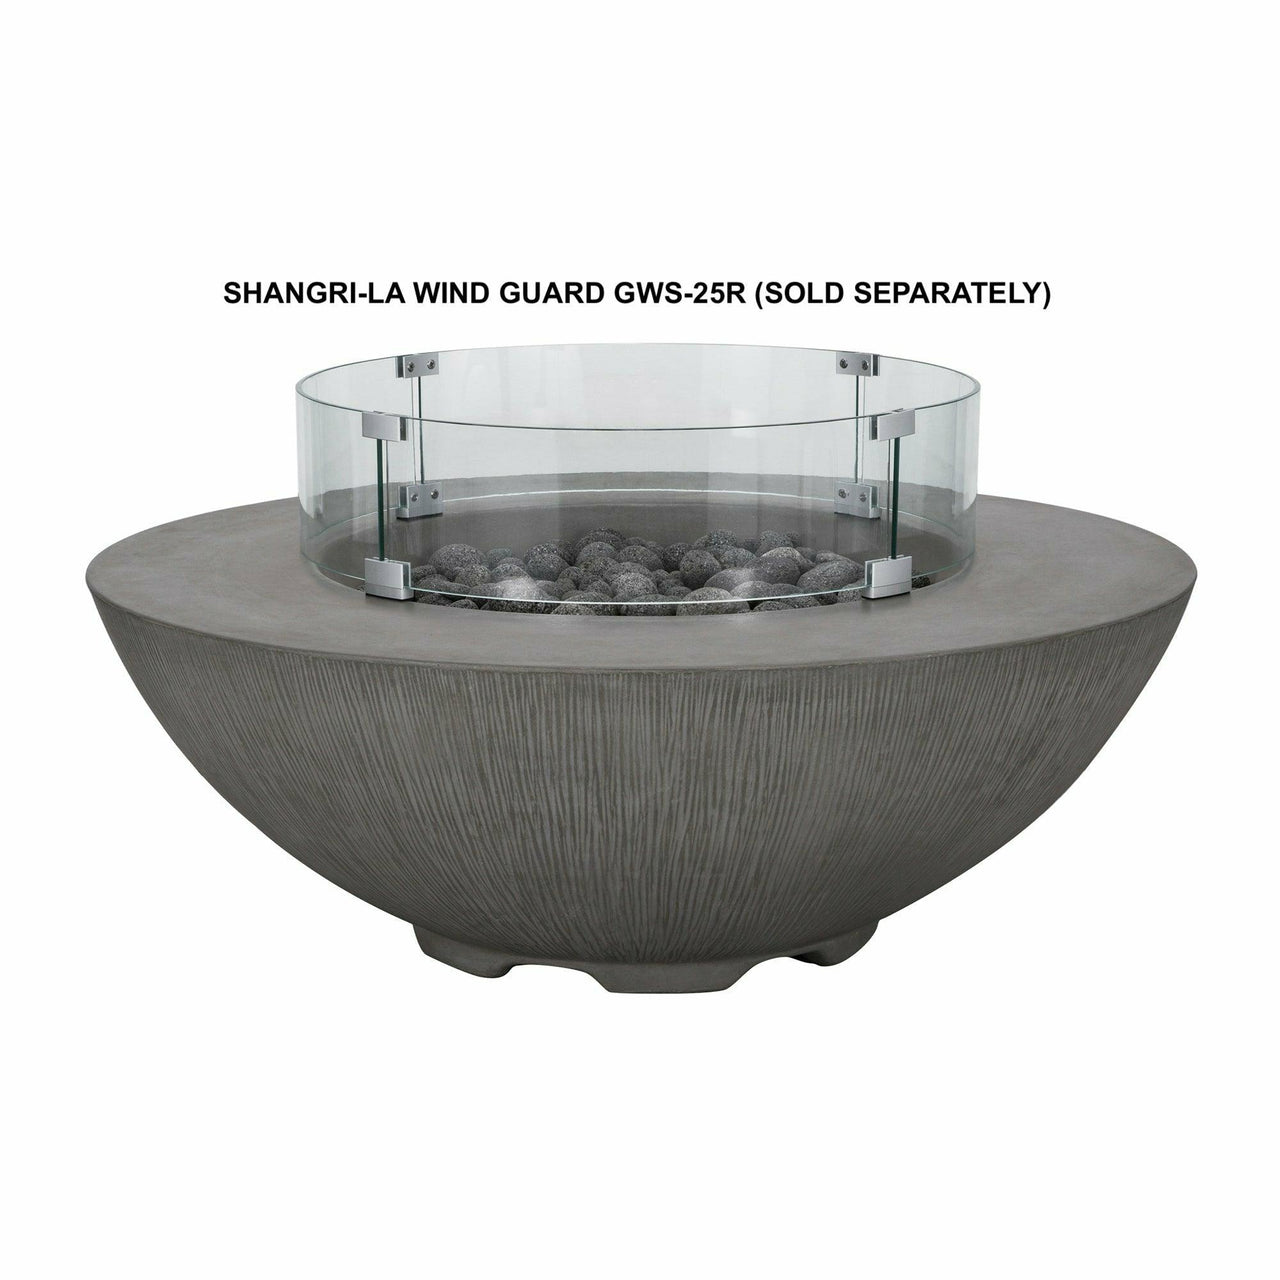 PyroMania Fire - Wind Guard for Shangri-La and Genesis Fire Tables - Fire Pit Stock